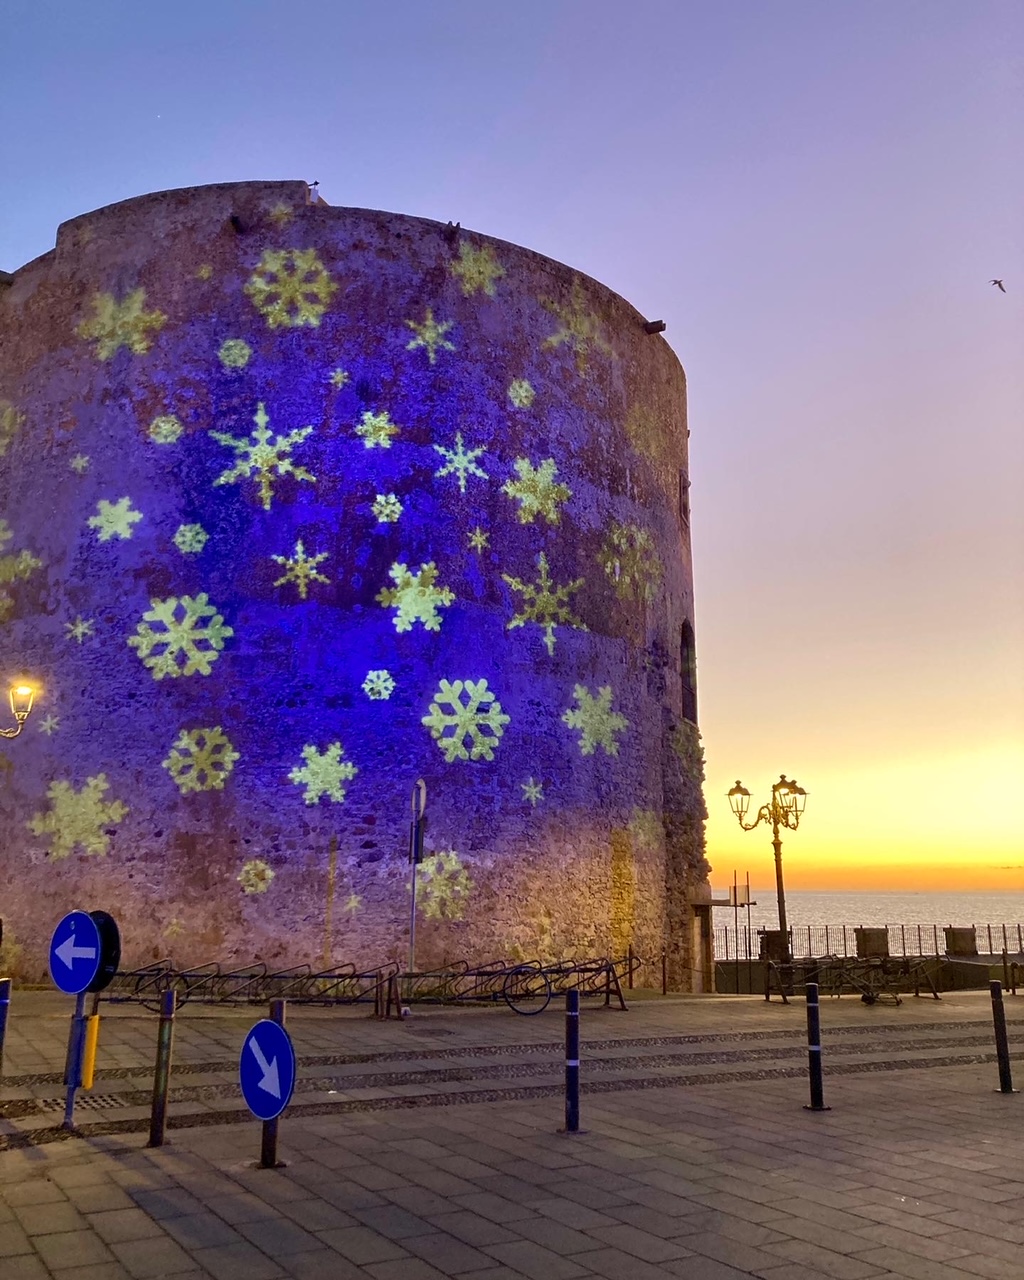 New Year’s Eve Alghero: an eventful month